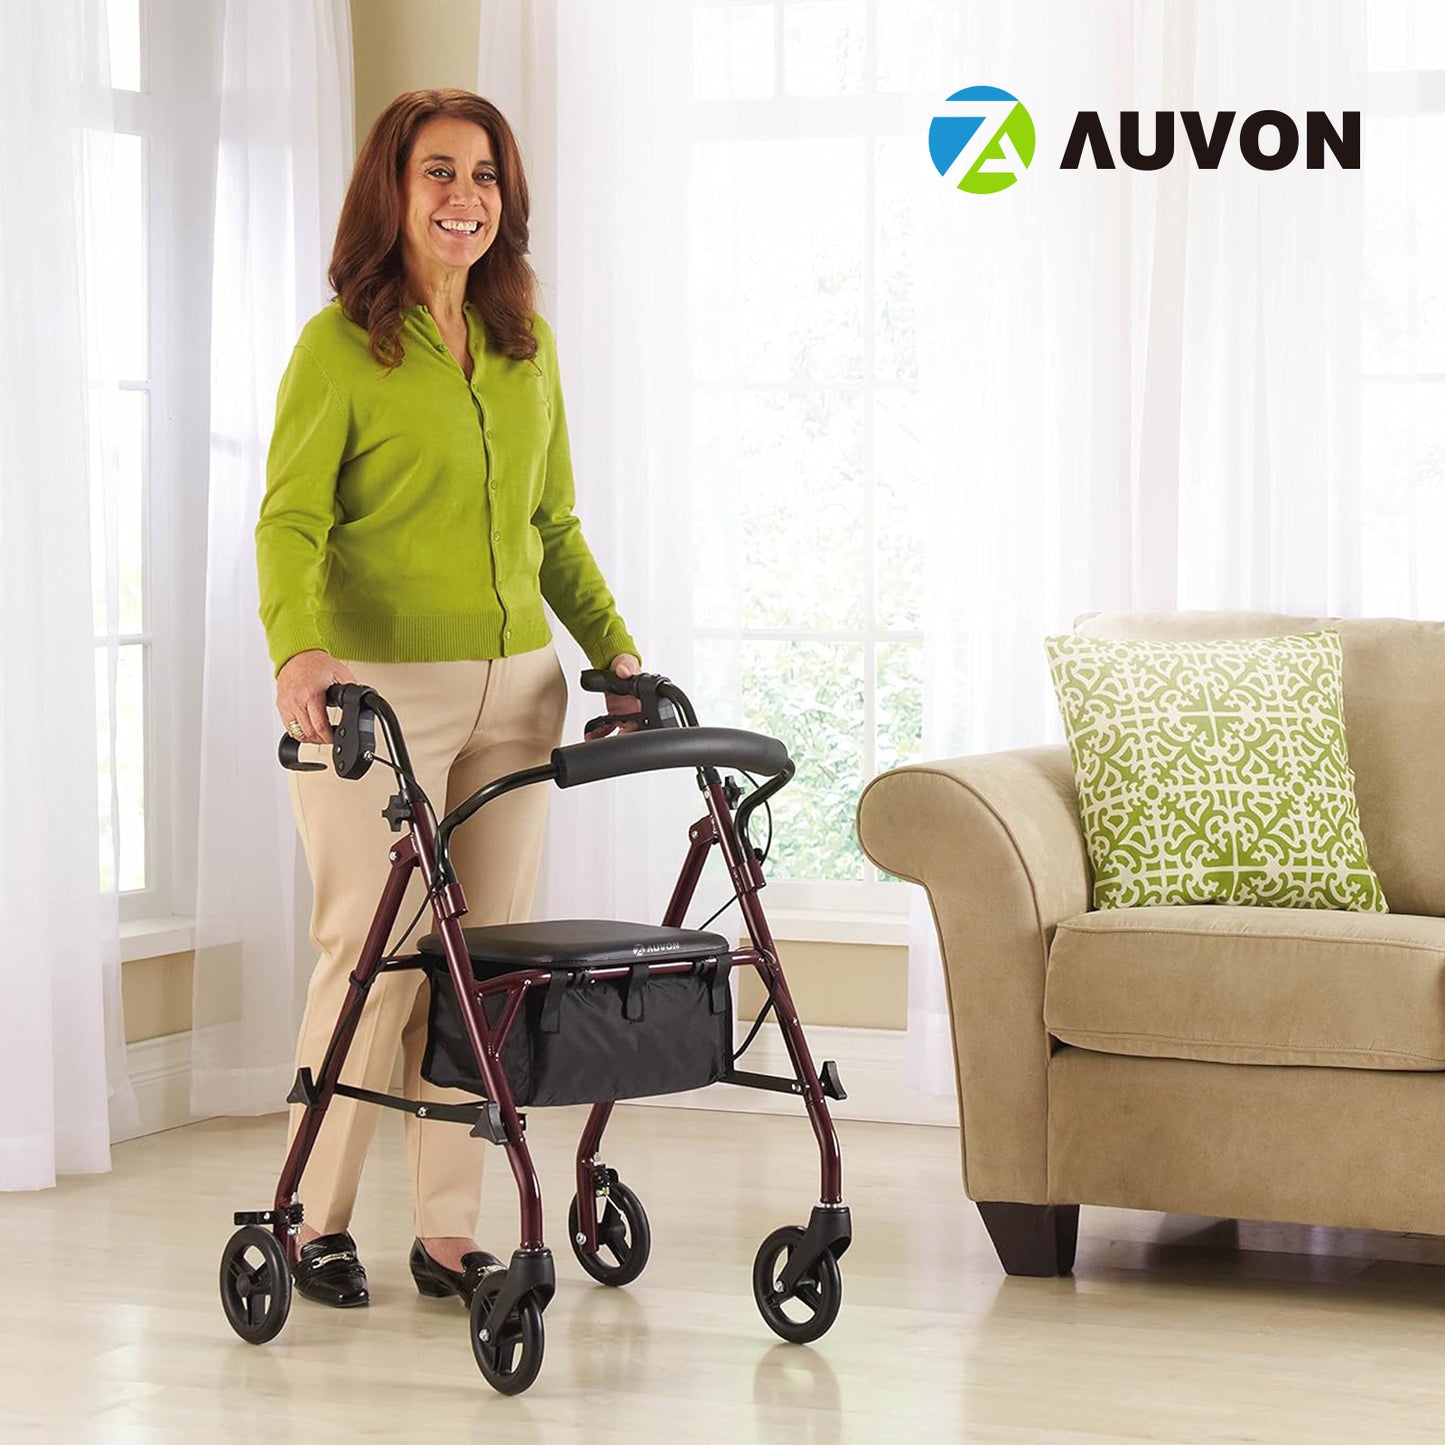 AUVON Rollator Walker with Seat, Steel Rolling Walker with 6-inch Wheels Supports up to 350 lbs, Medical Walker, Burgundy